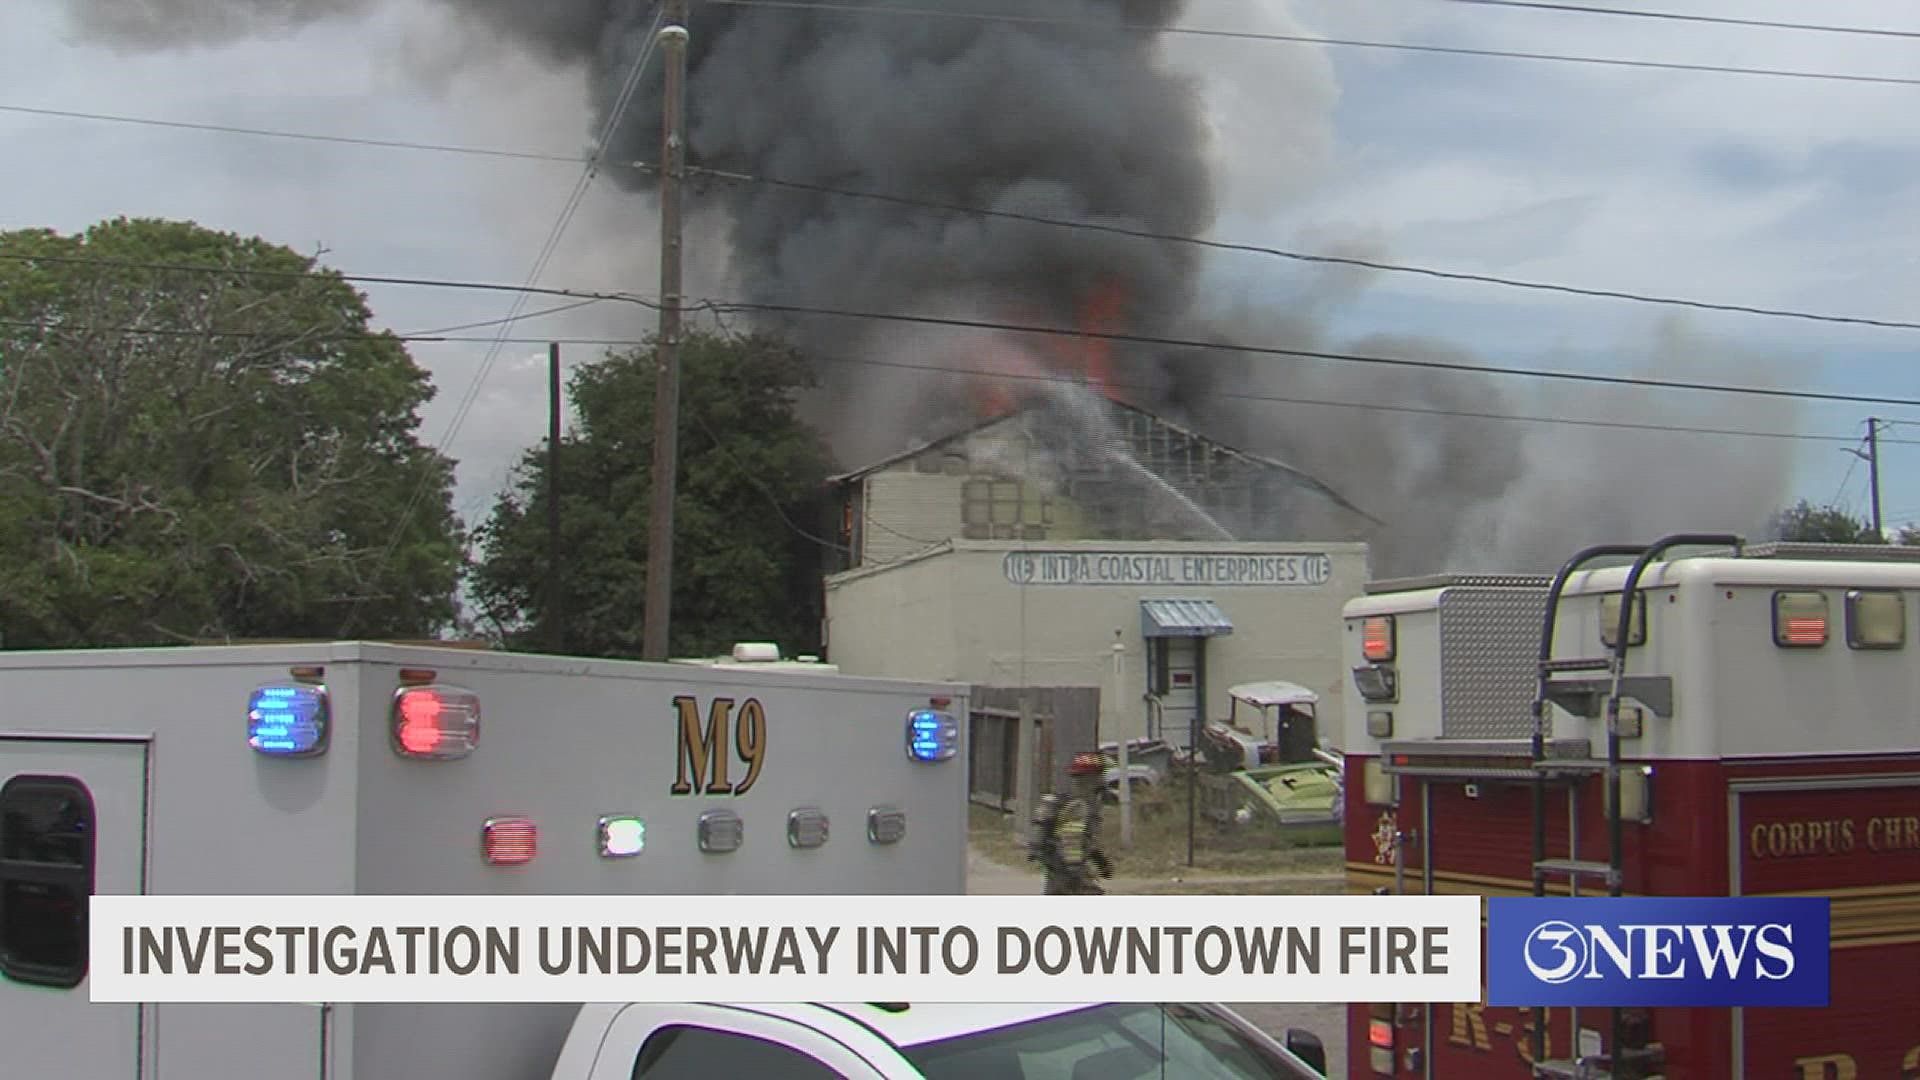 The fire broke out just after 1 p.m. on the 900 block of Staples St.